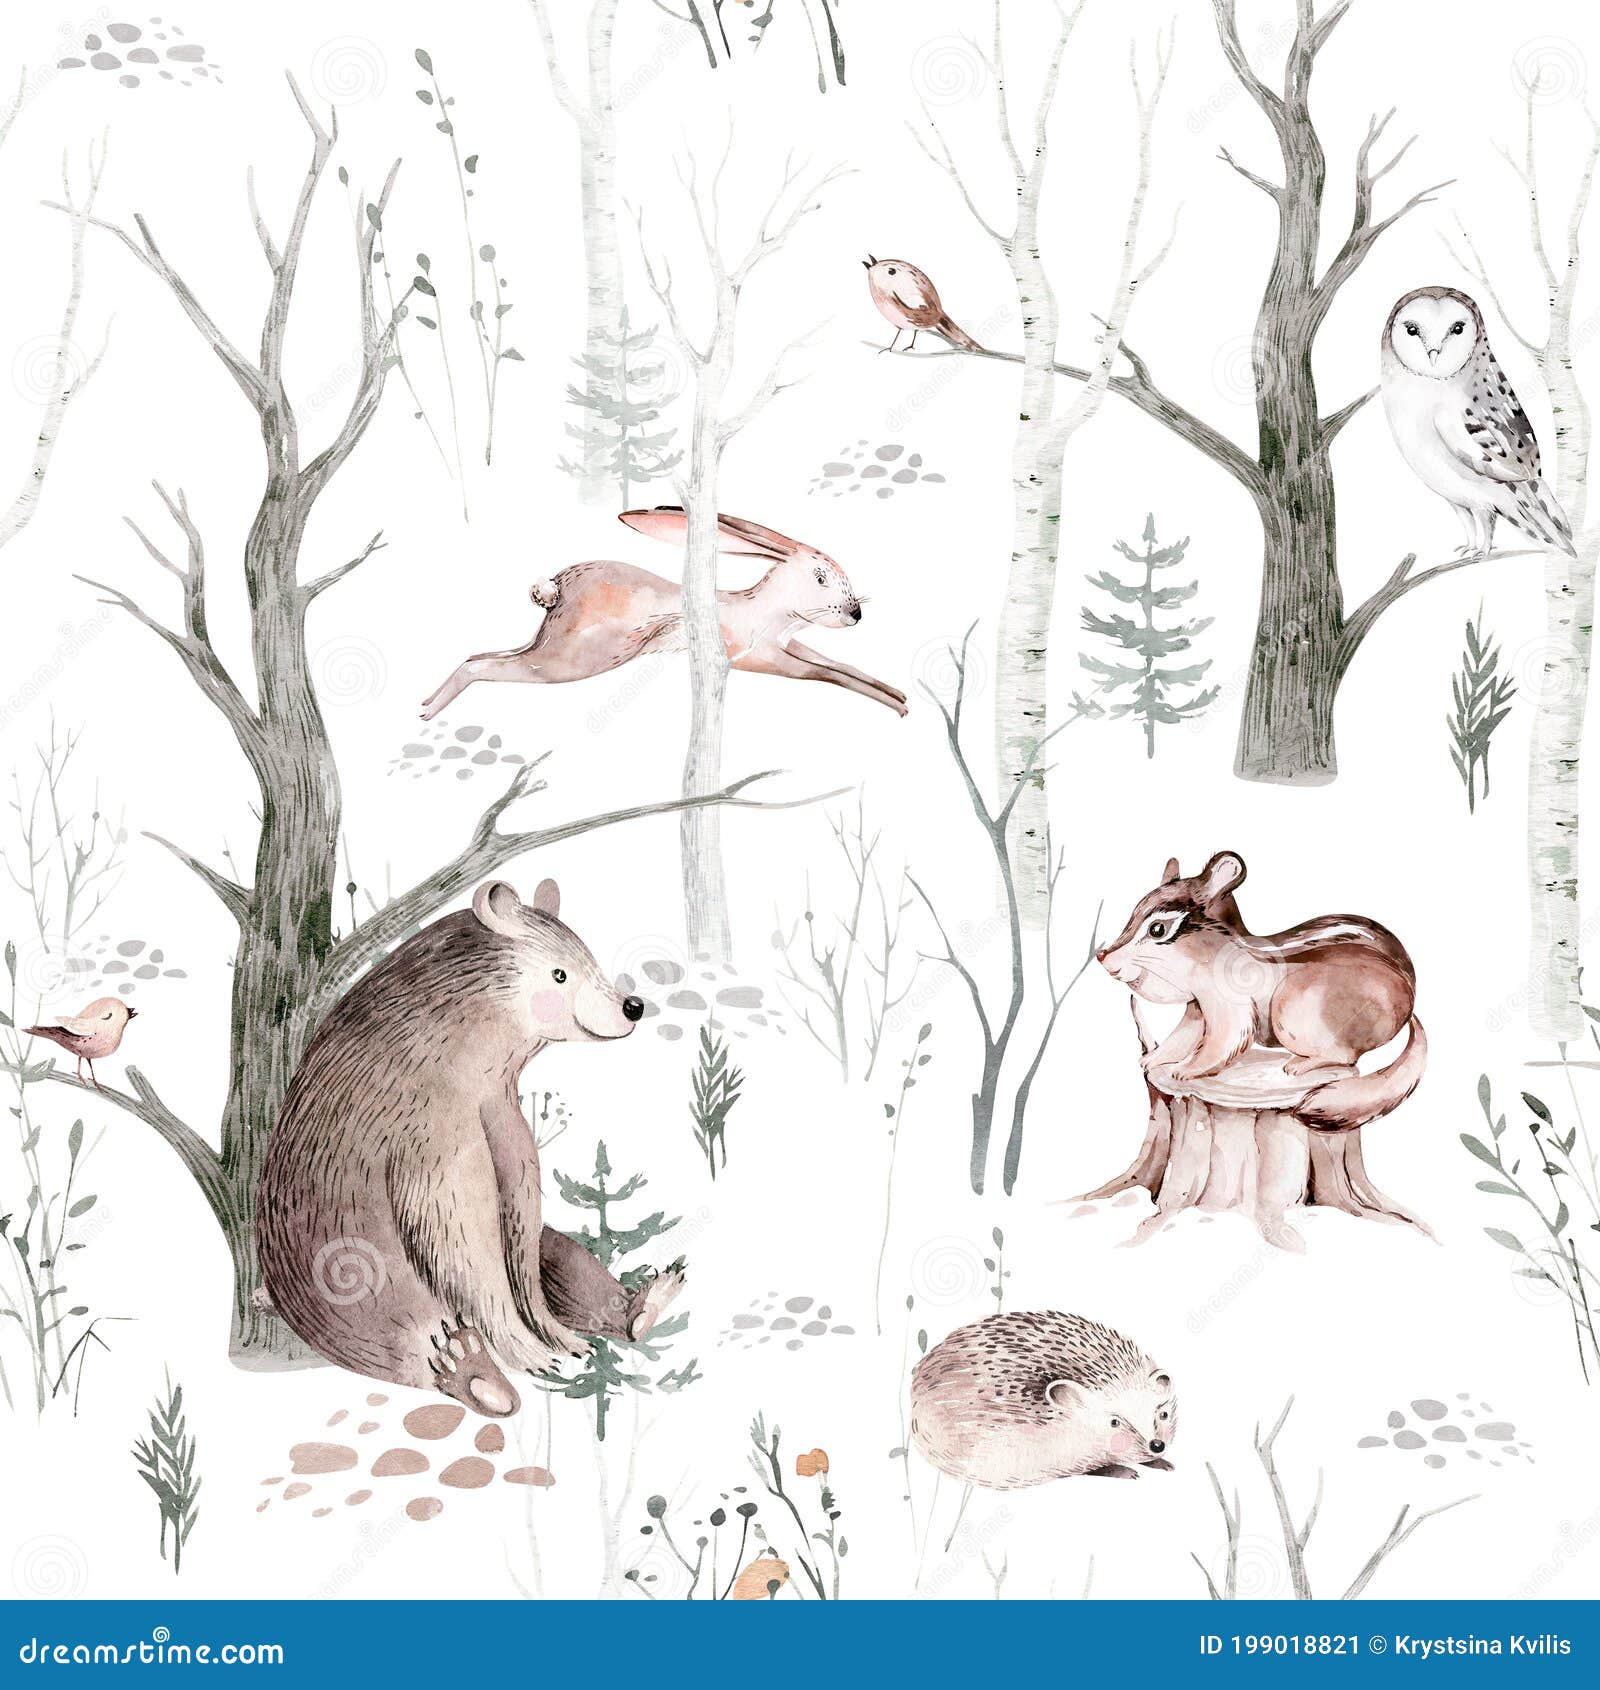 watercolor woodland animal scandinavian seamless pattern. fabric wallpaper background with owl, hedgehog, fox and